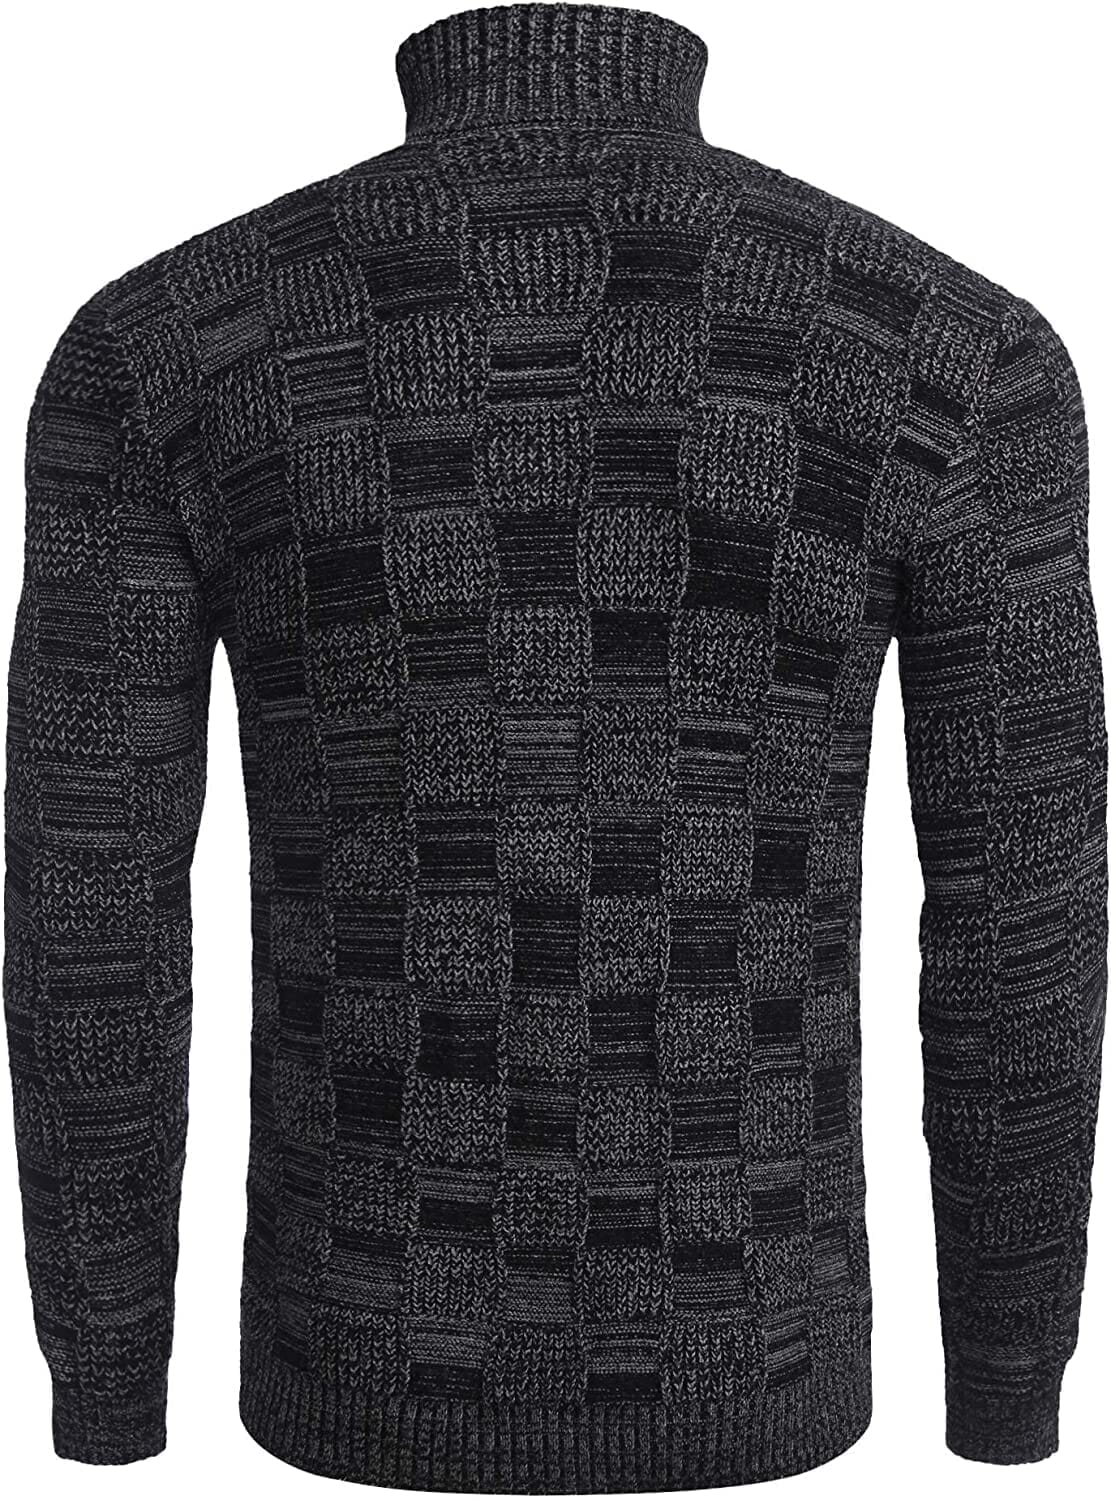 Men's Knitted Turtleneck Sweater Plaid Hightneck Long Sleeve Sweater (US Only) Sweaters COOFANDY Store 